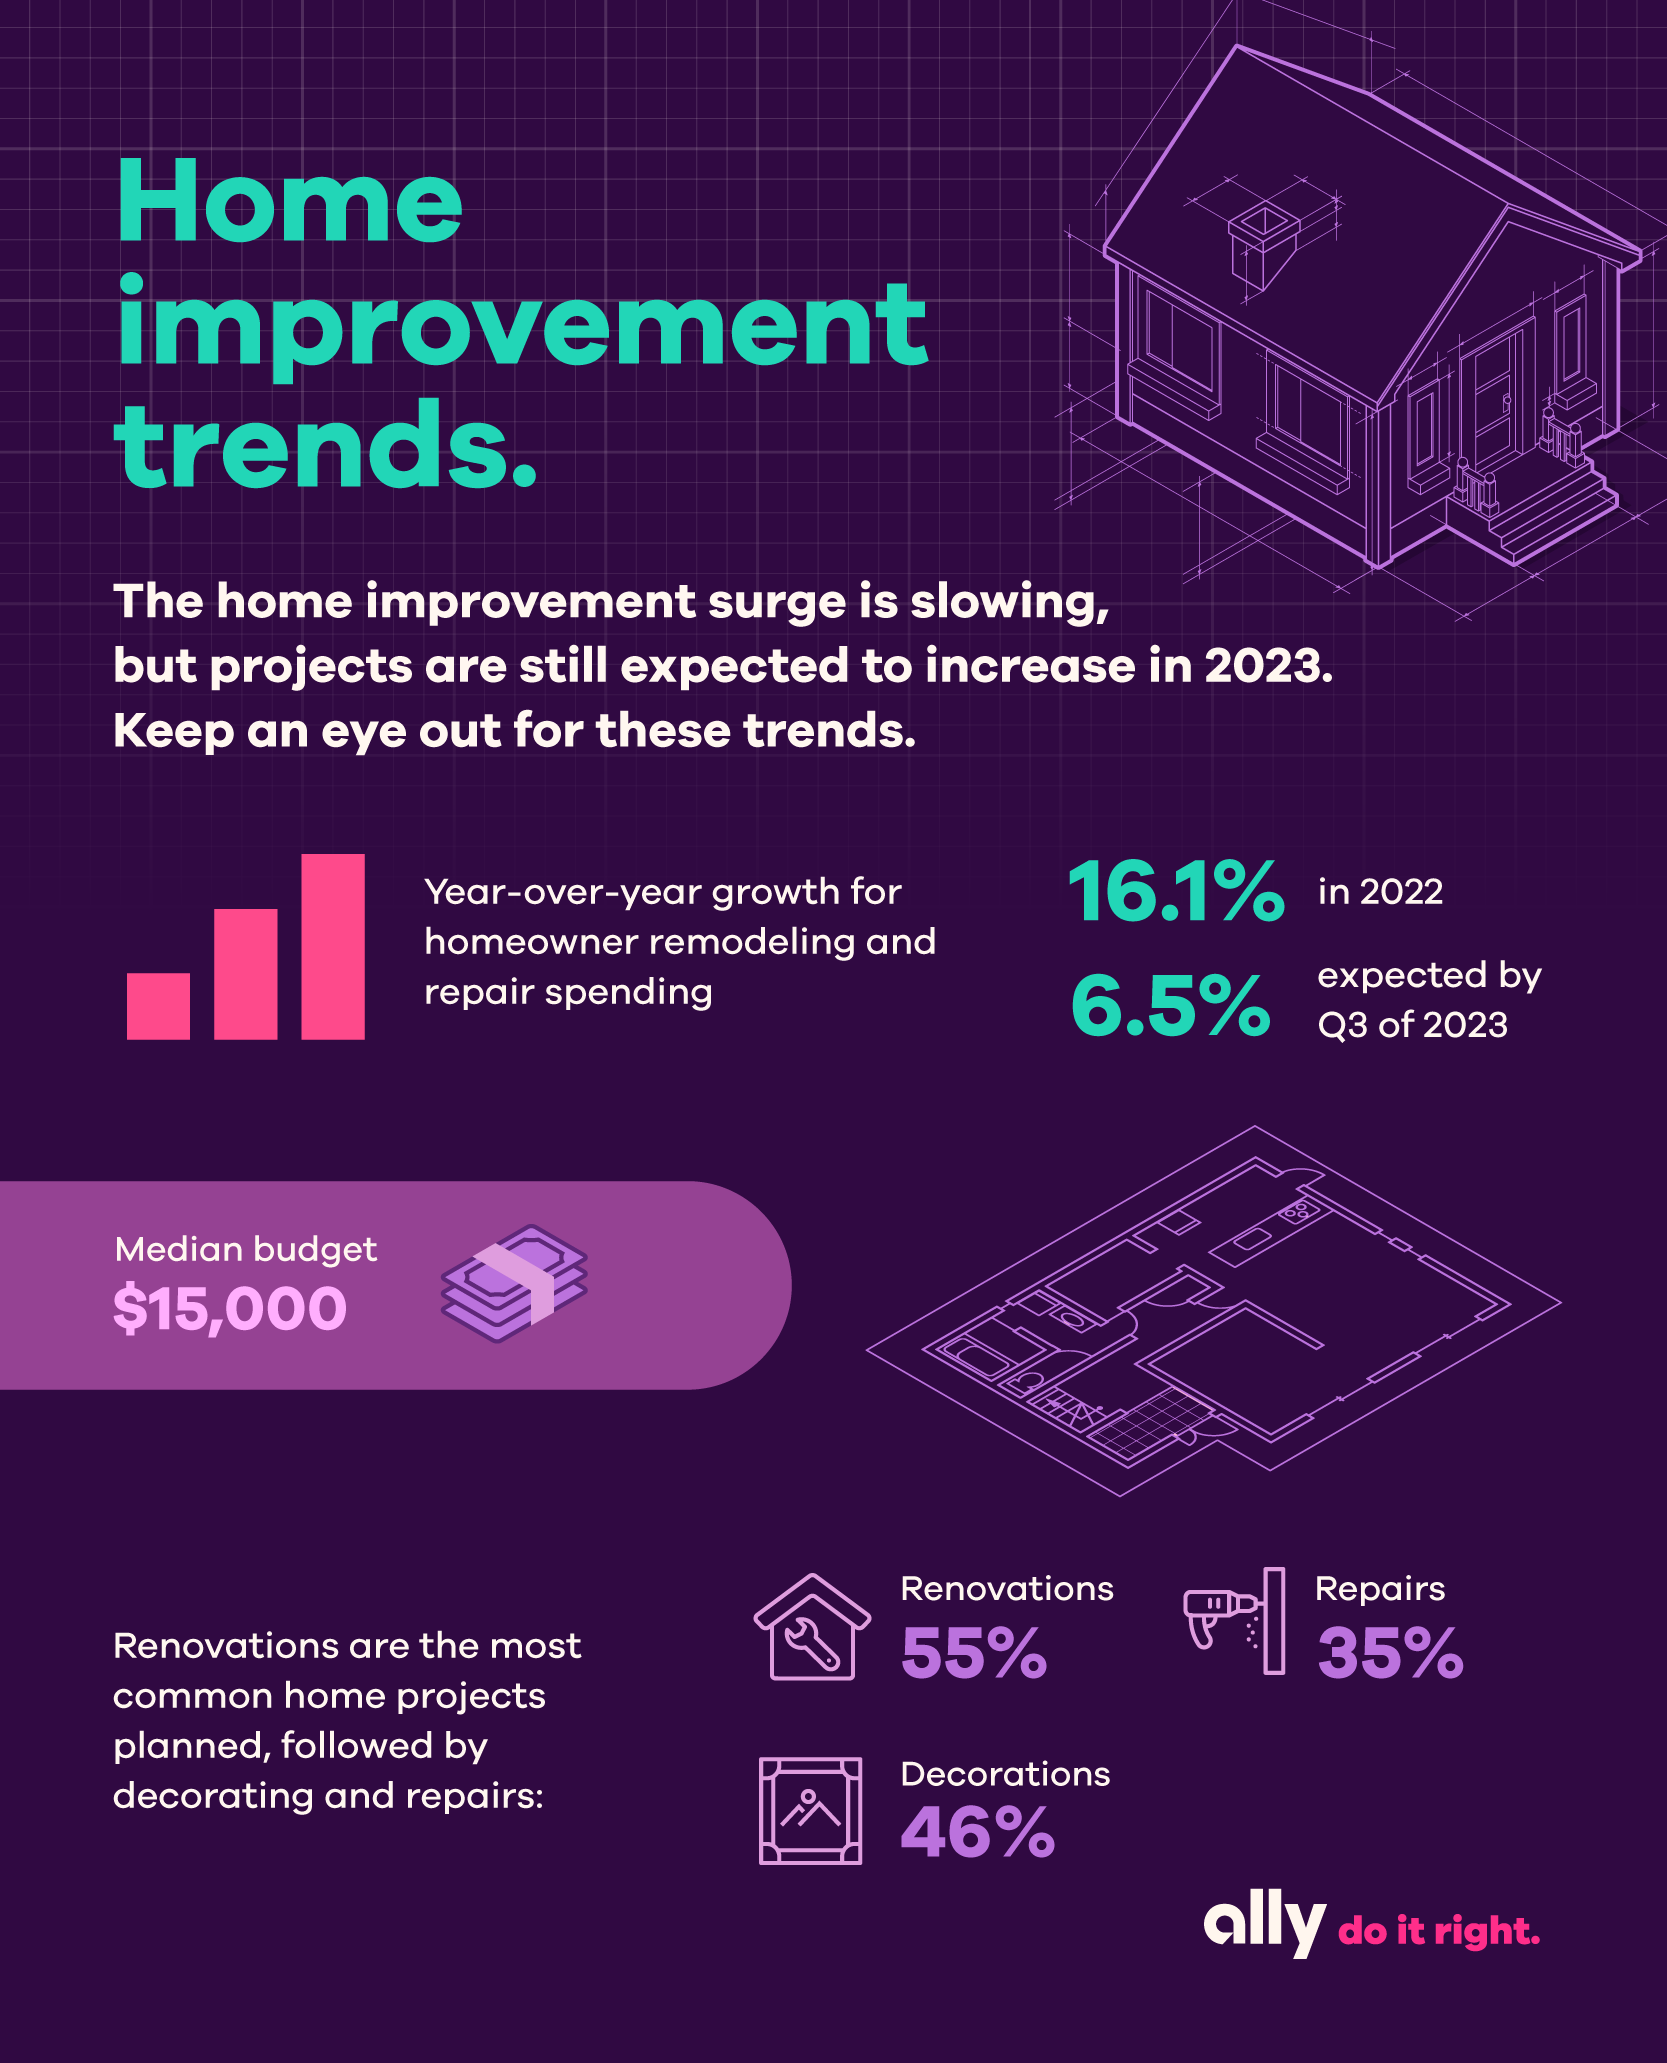 Graphic with title, “Home improvement trends.” The home improvement surge is slowing, but projects are still expected to increase in 2023. Keep an eye out for these trends. Year-over-year growth for homeowner remodeling and repair spending. 16.1% in 2022, 6.5% expected by Q3 of 2023. Median budget $15,000. Renovations are the most common home projects planned, followed by decorating and repairs: Renovations 55%, Decorations 46%, Repairs 35%.